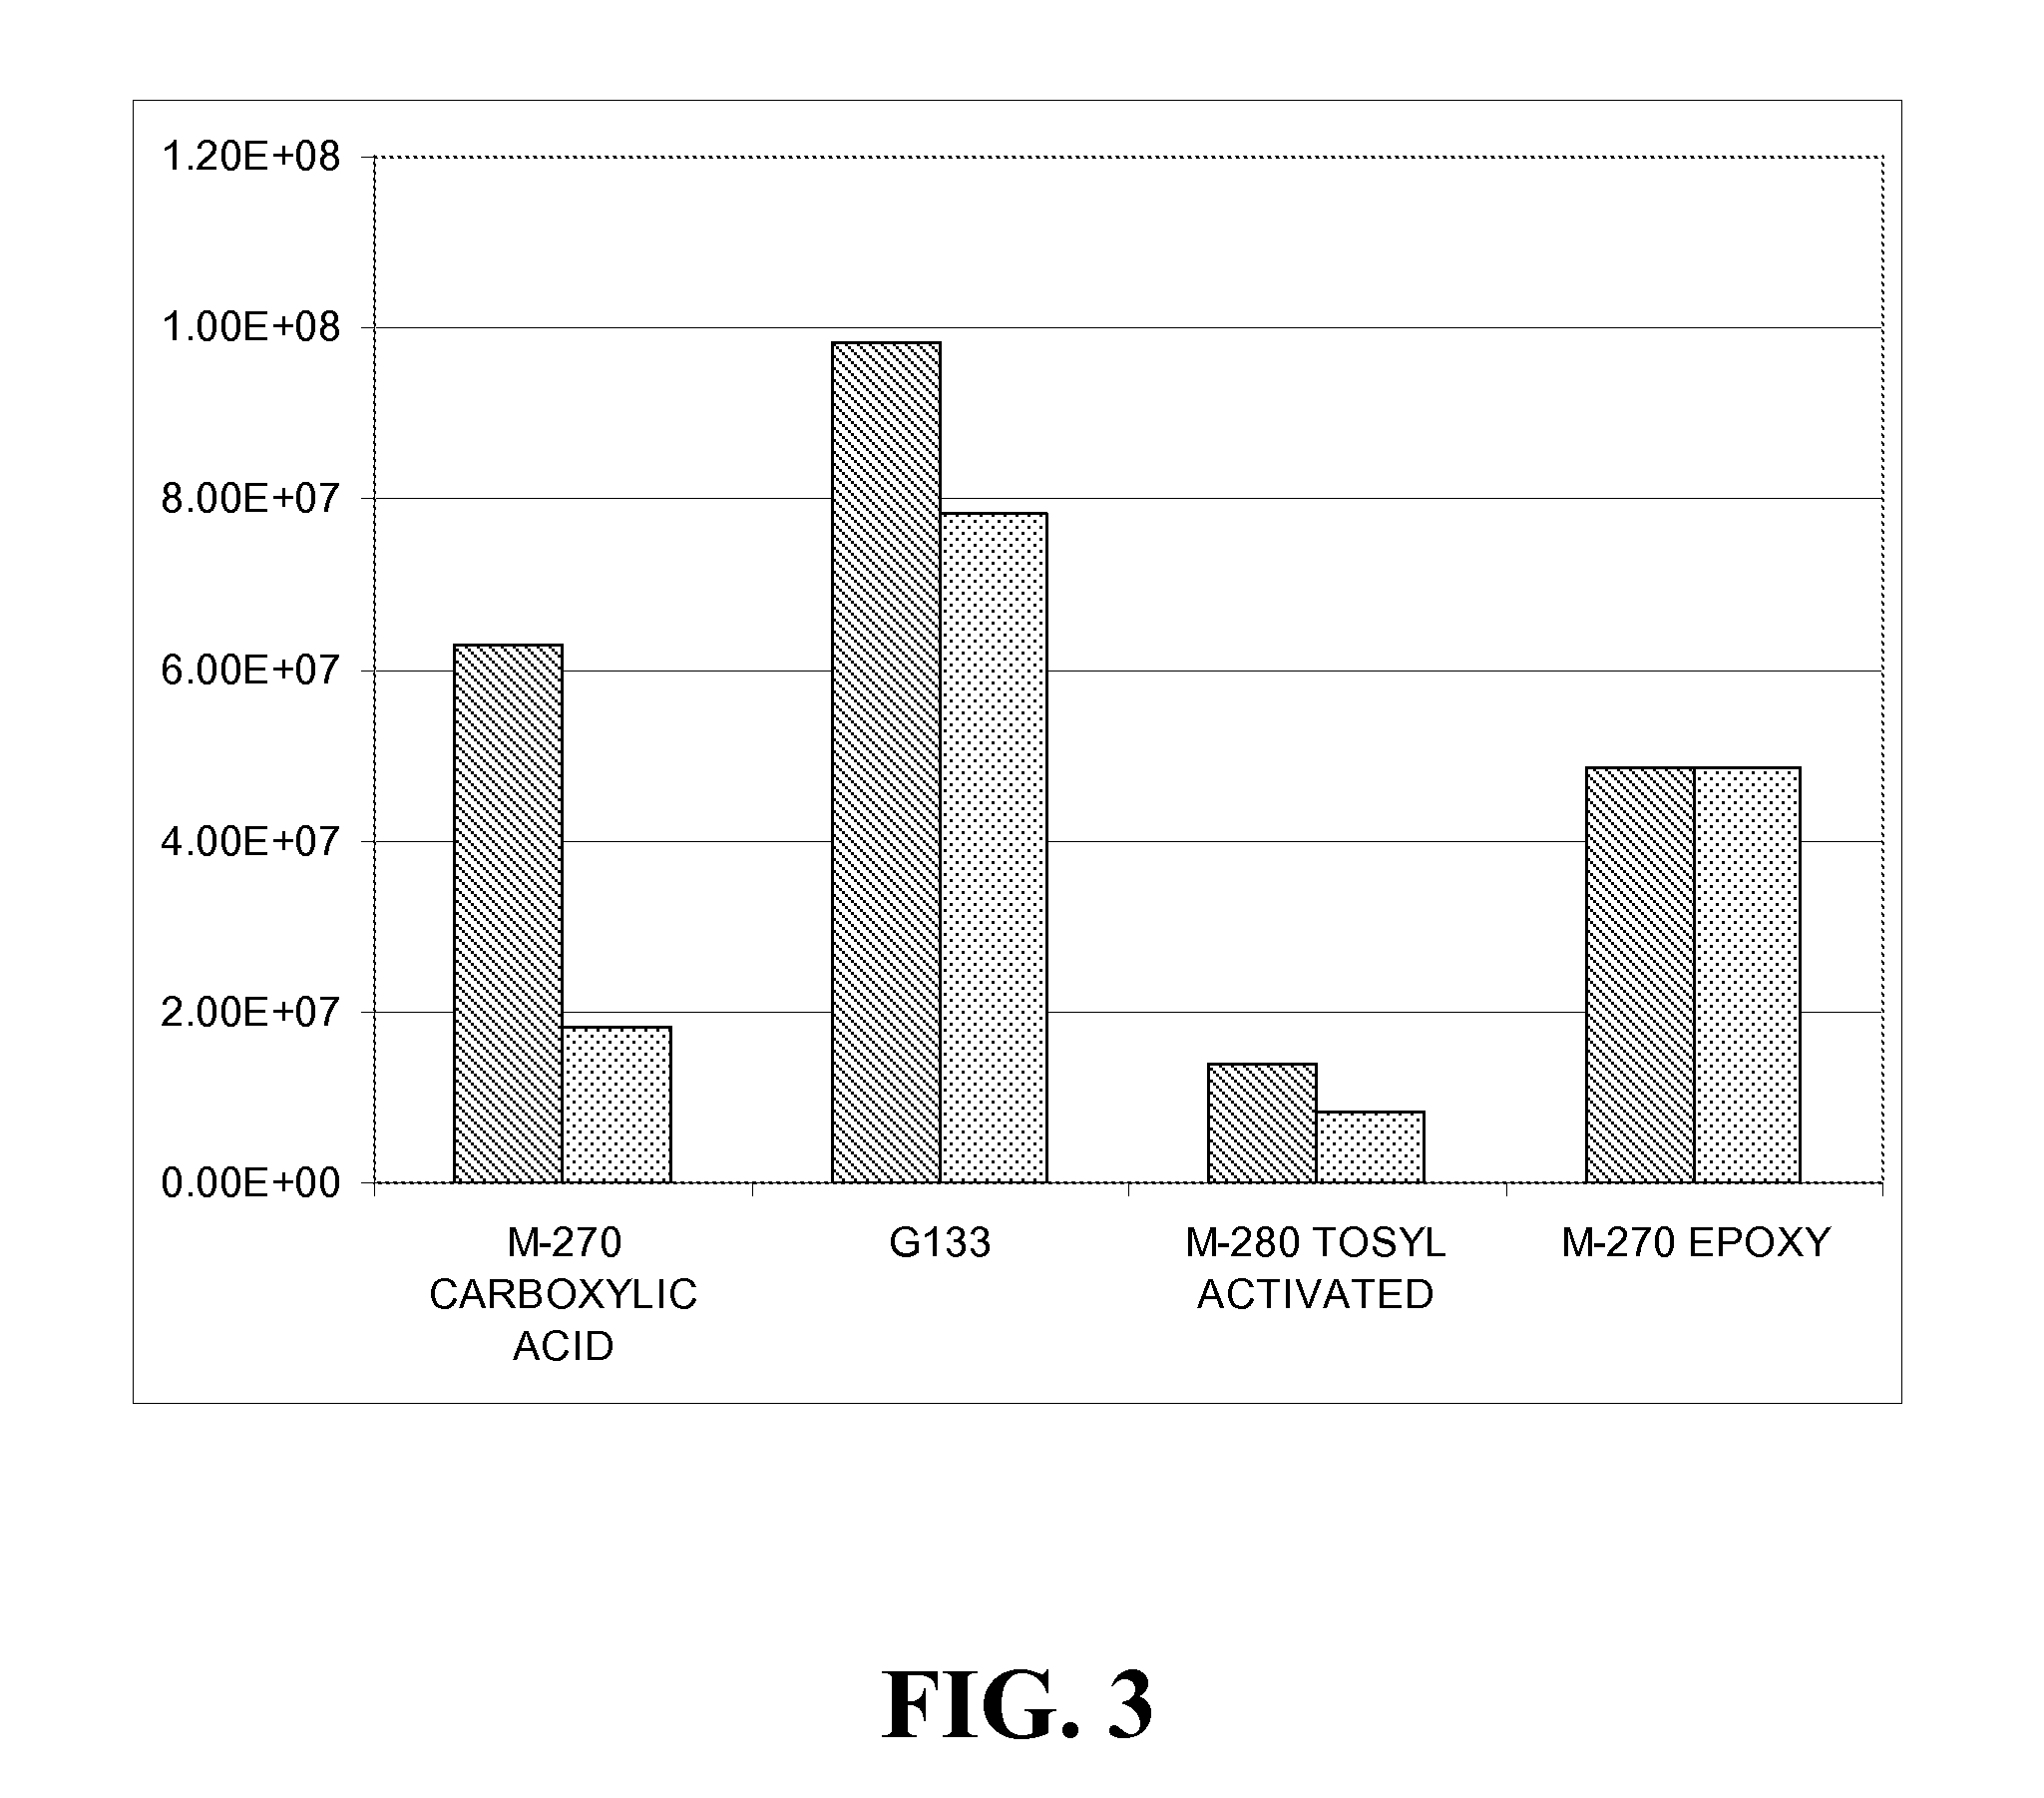 Particles containing multi-block polymers